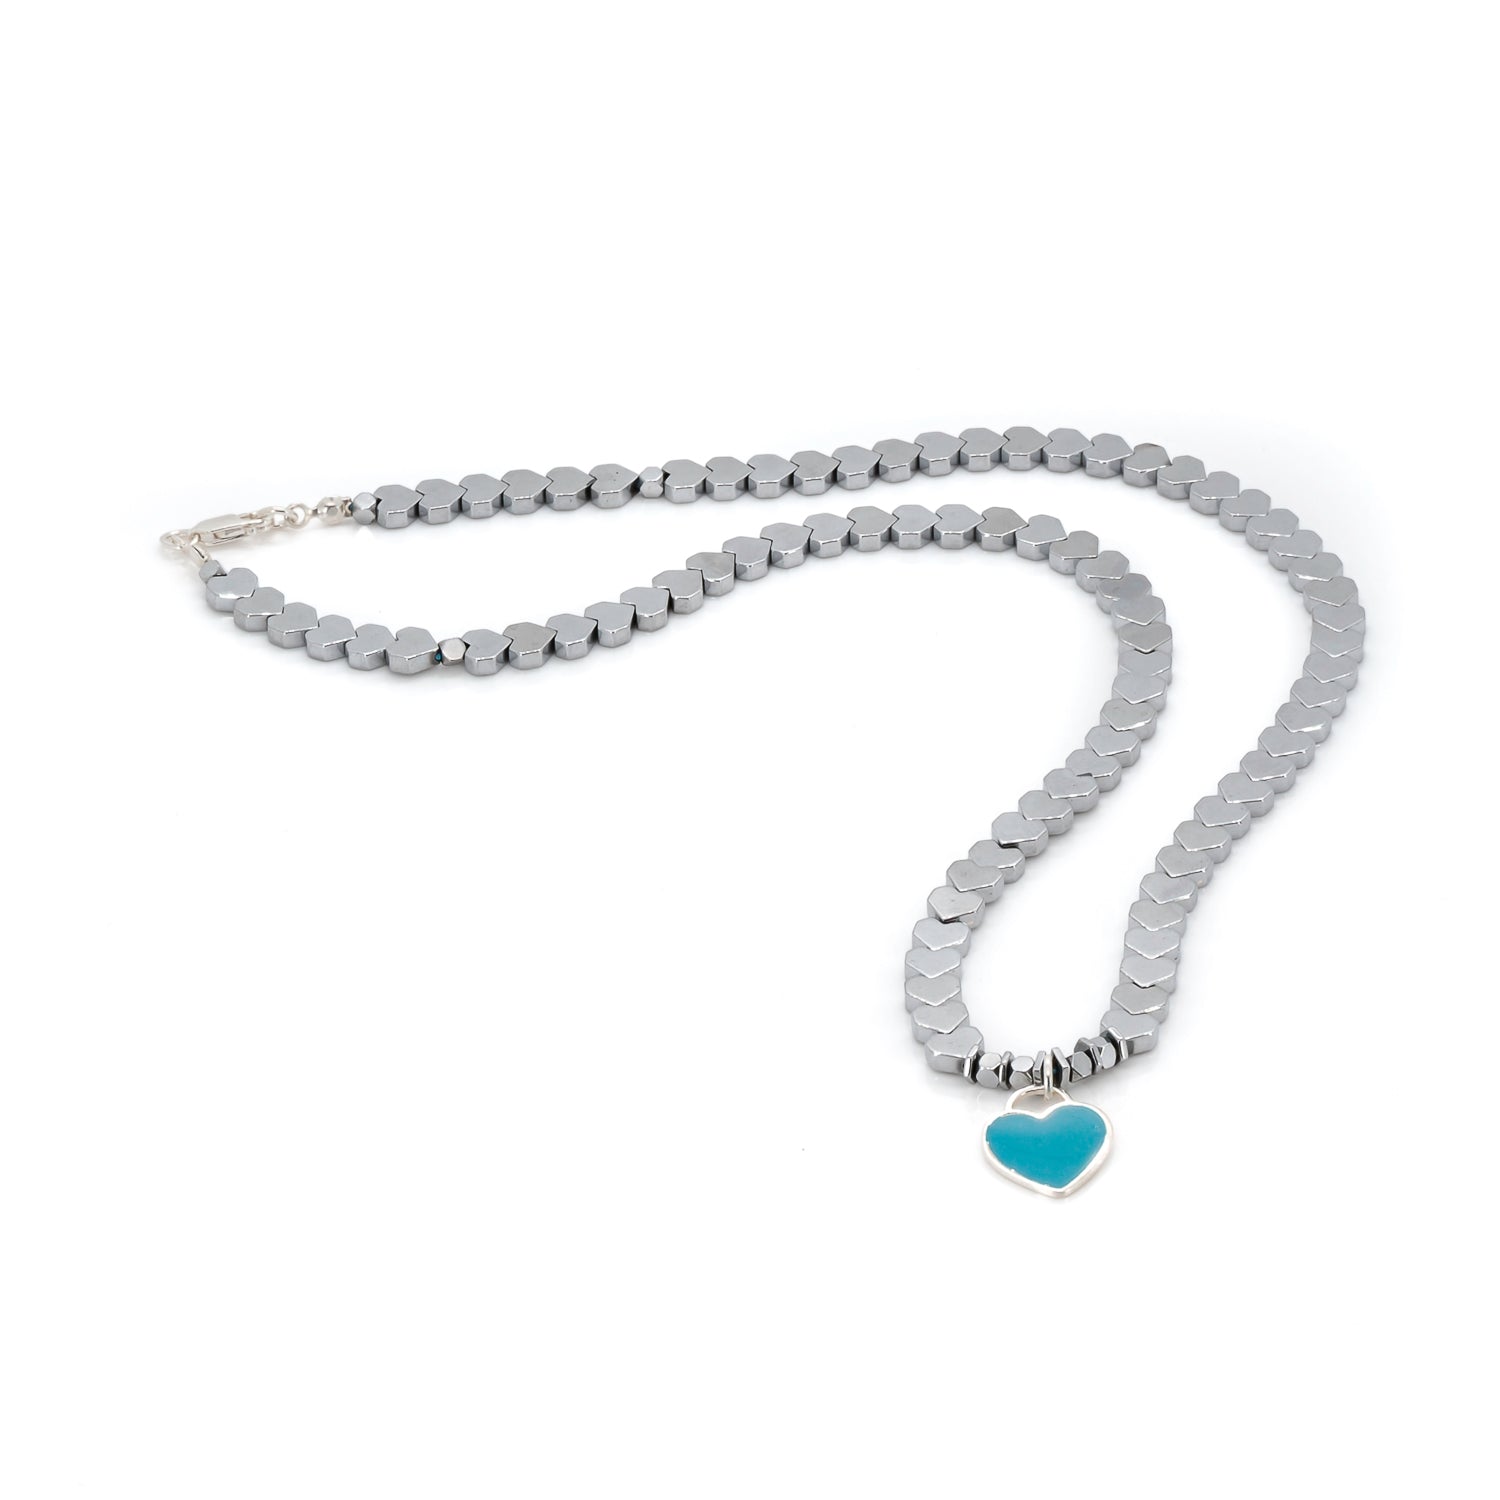 Handcrafted Silver Hematite Necklace with a turquoise heart pendant, designed for grounding energy and style